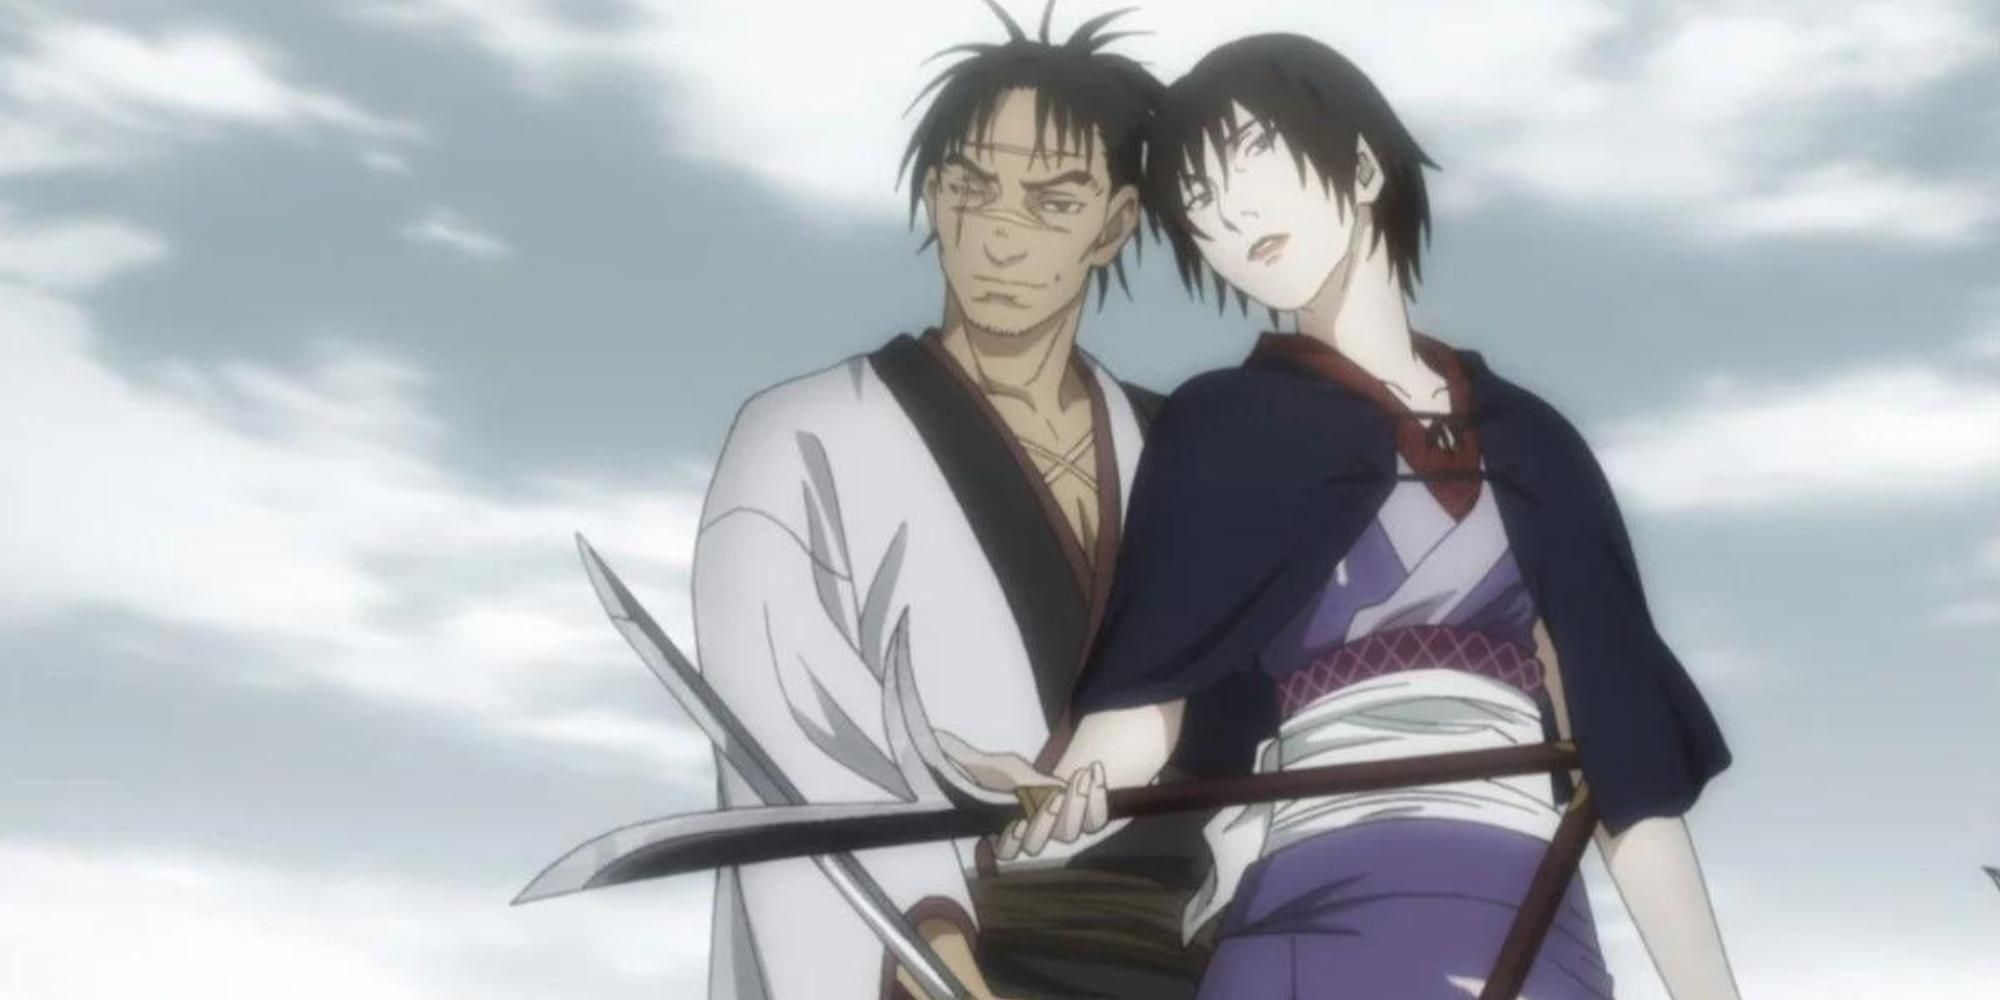 Manji and Makie in Blade of the Immortal